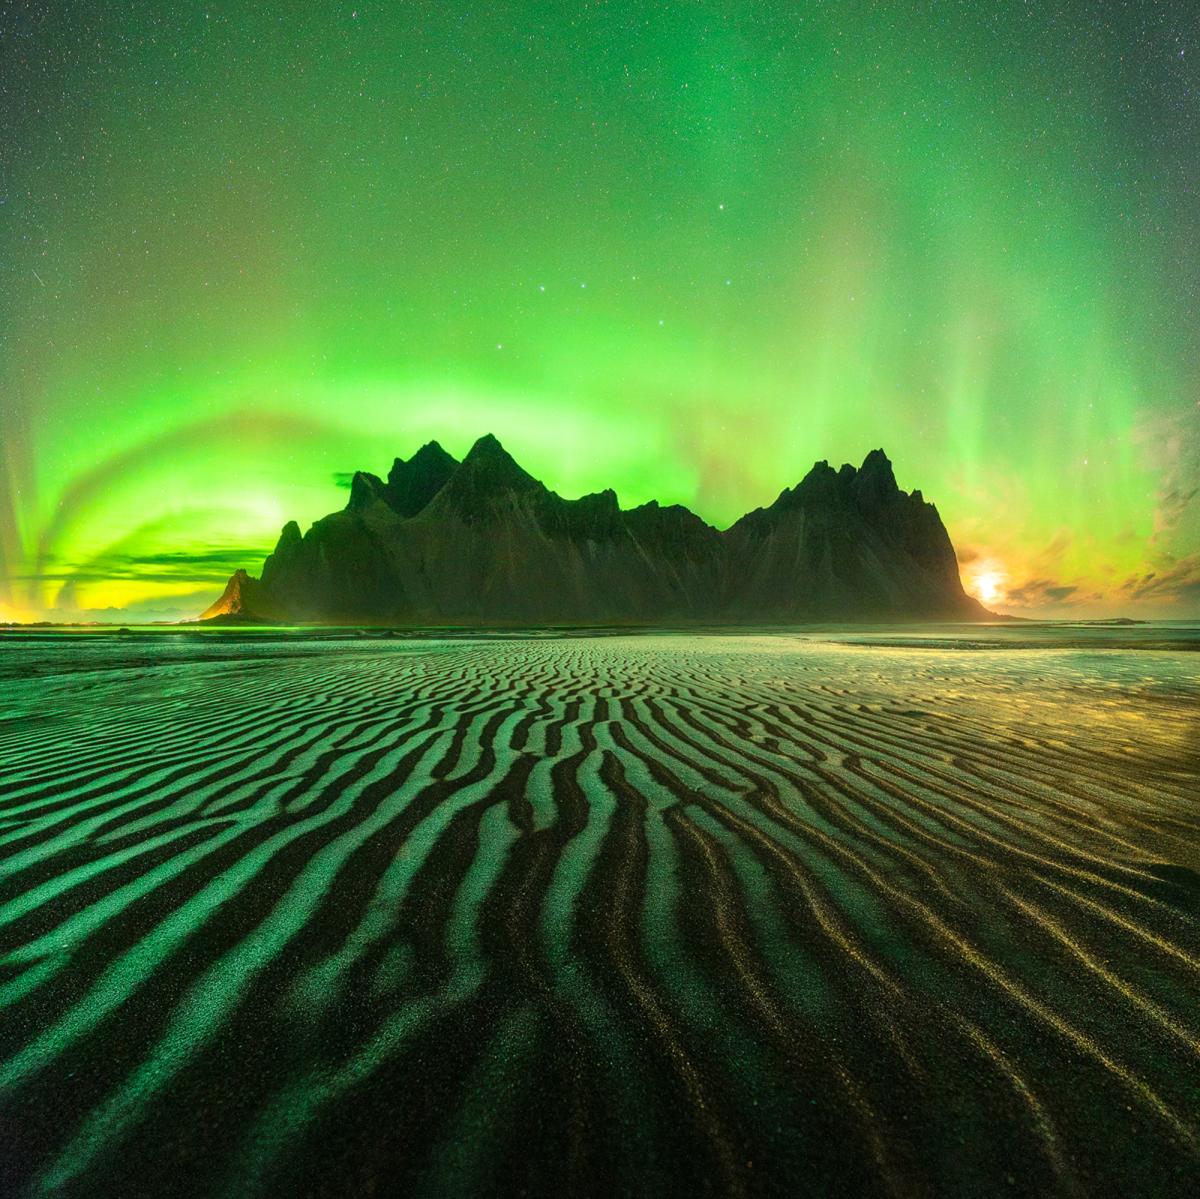 A mountain rises from a beach's wavy black sands, glowing in greens and pale yellows beneath the blazing aurora arched in the sky.